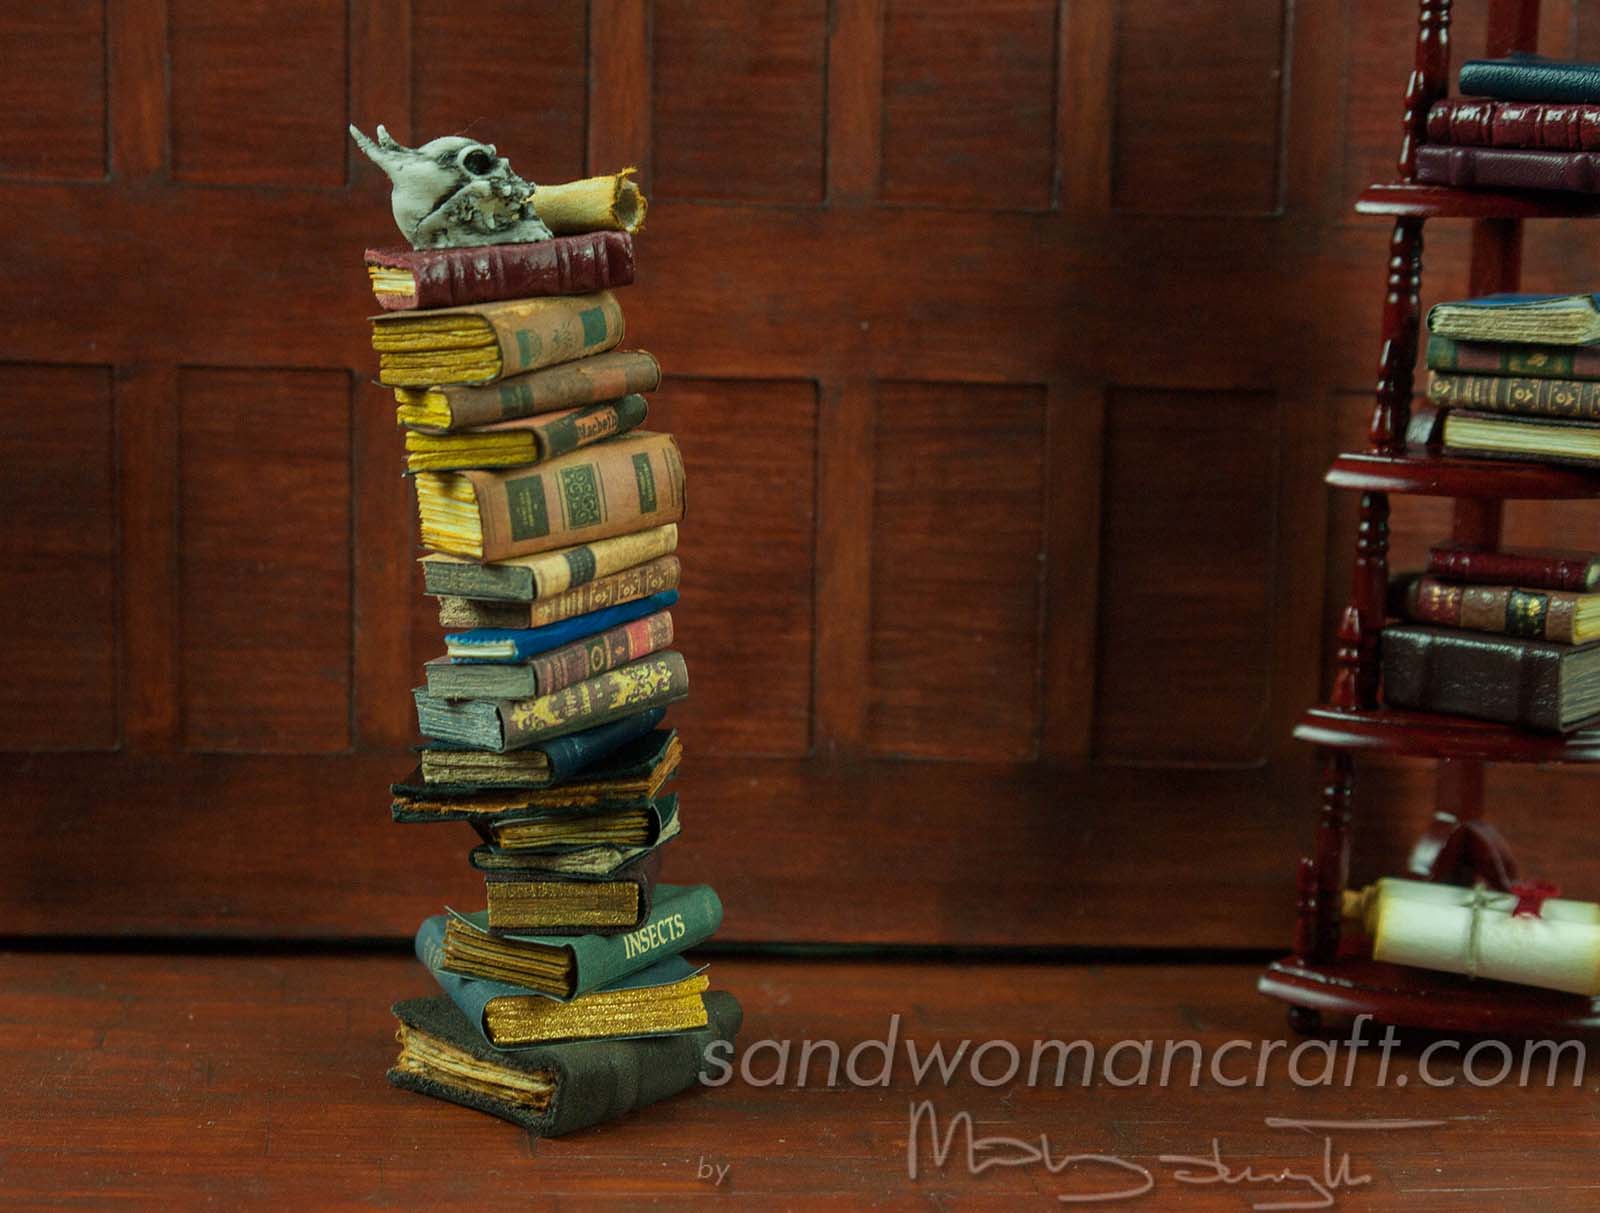 Miniature book stack with Devil's skull